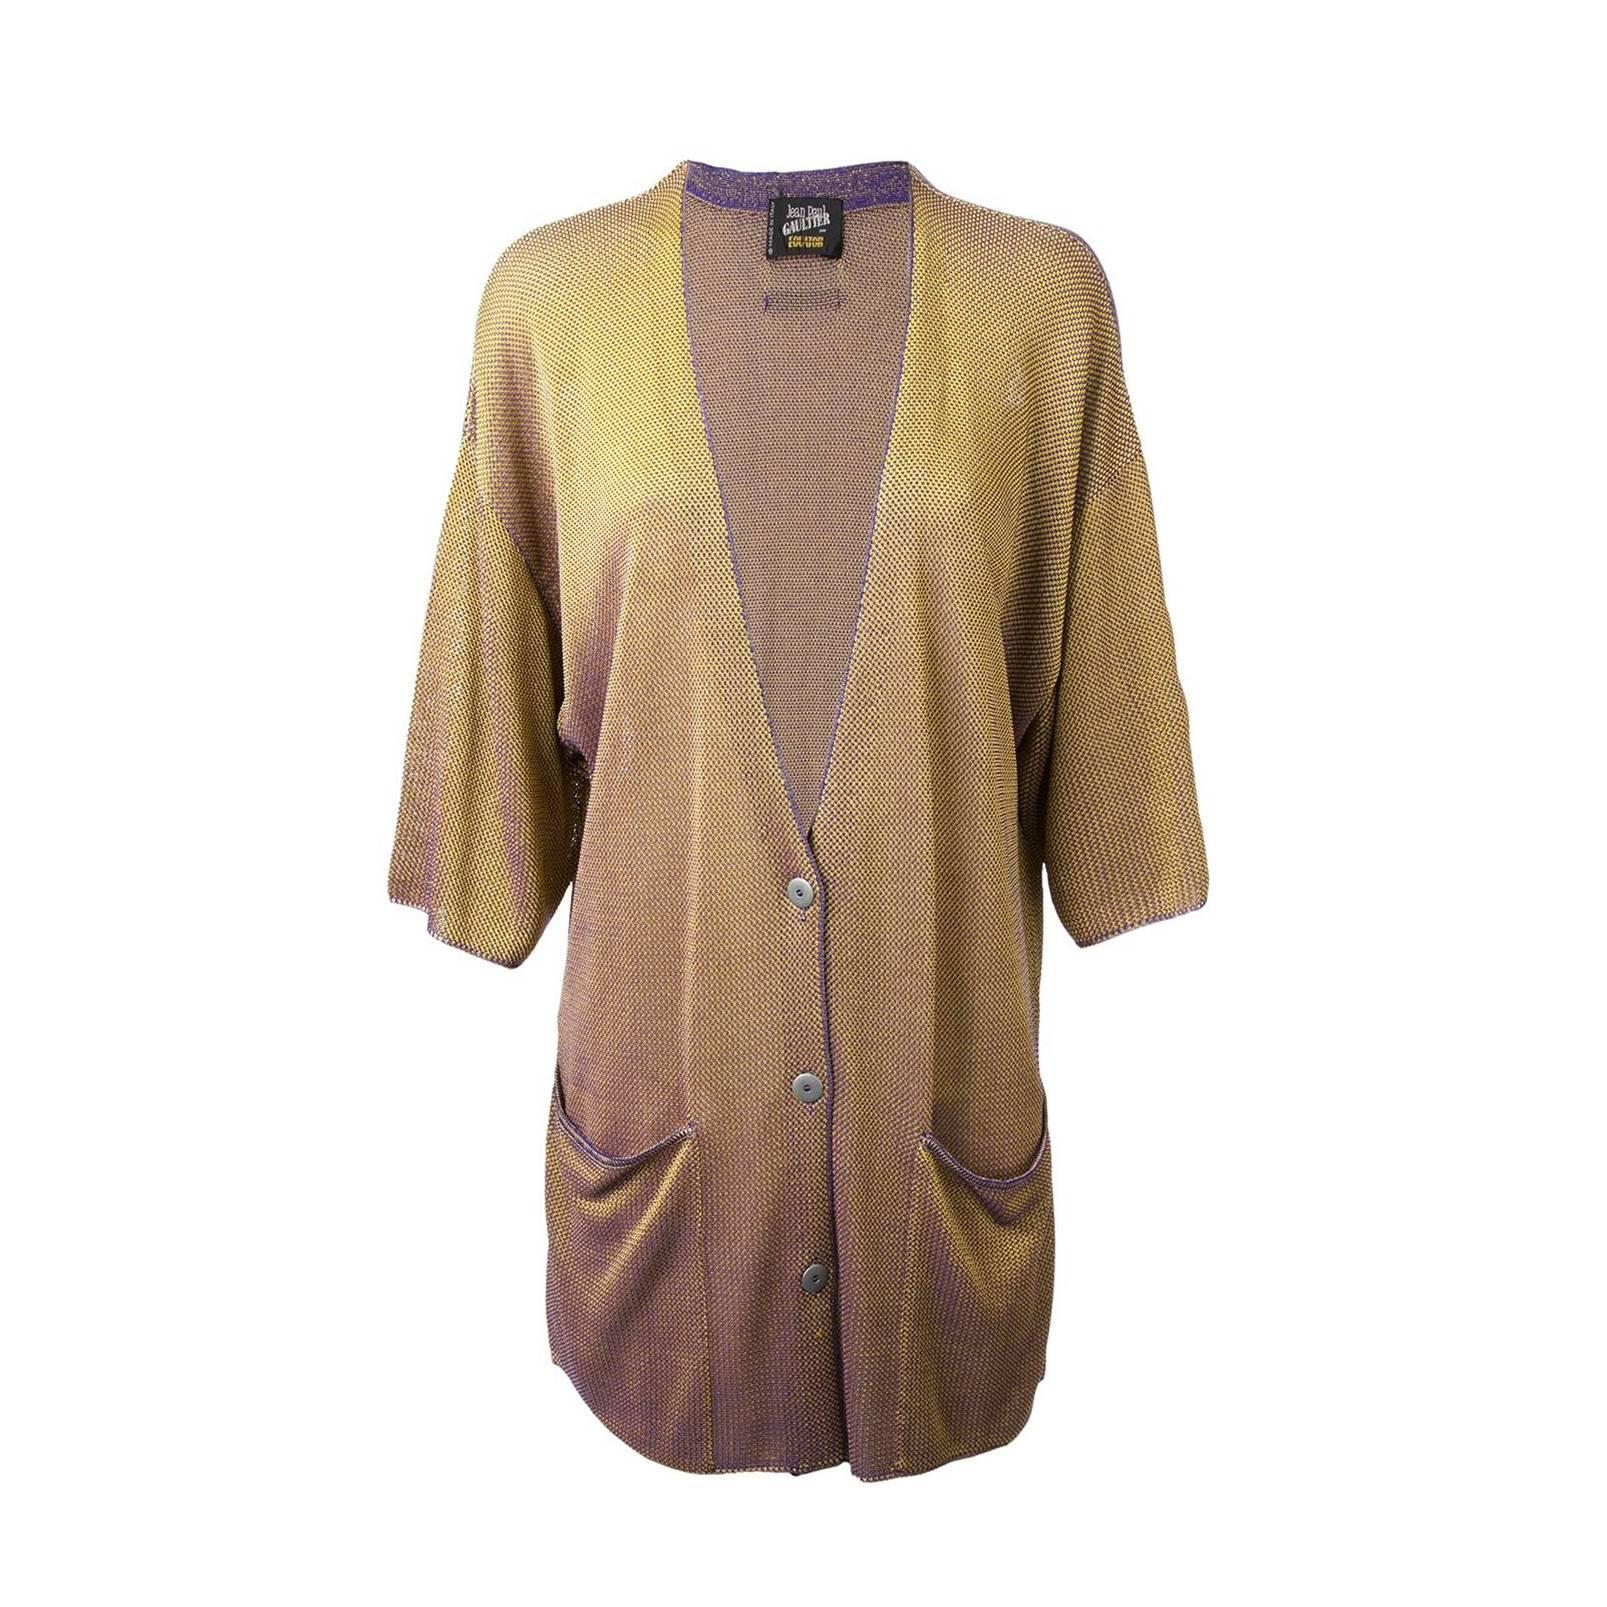 Gaultier 1985/86 “The Uptide Charme of the Bourgeoisie” opalescent cardigan For Sale